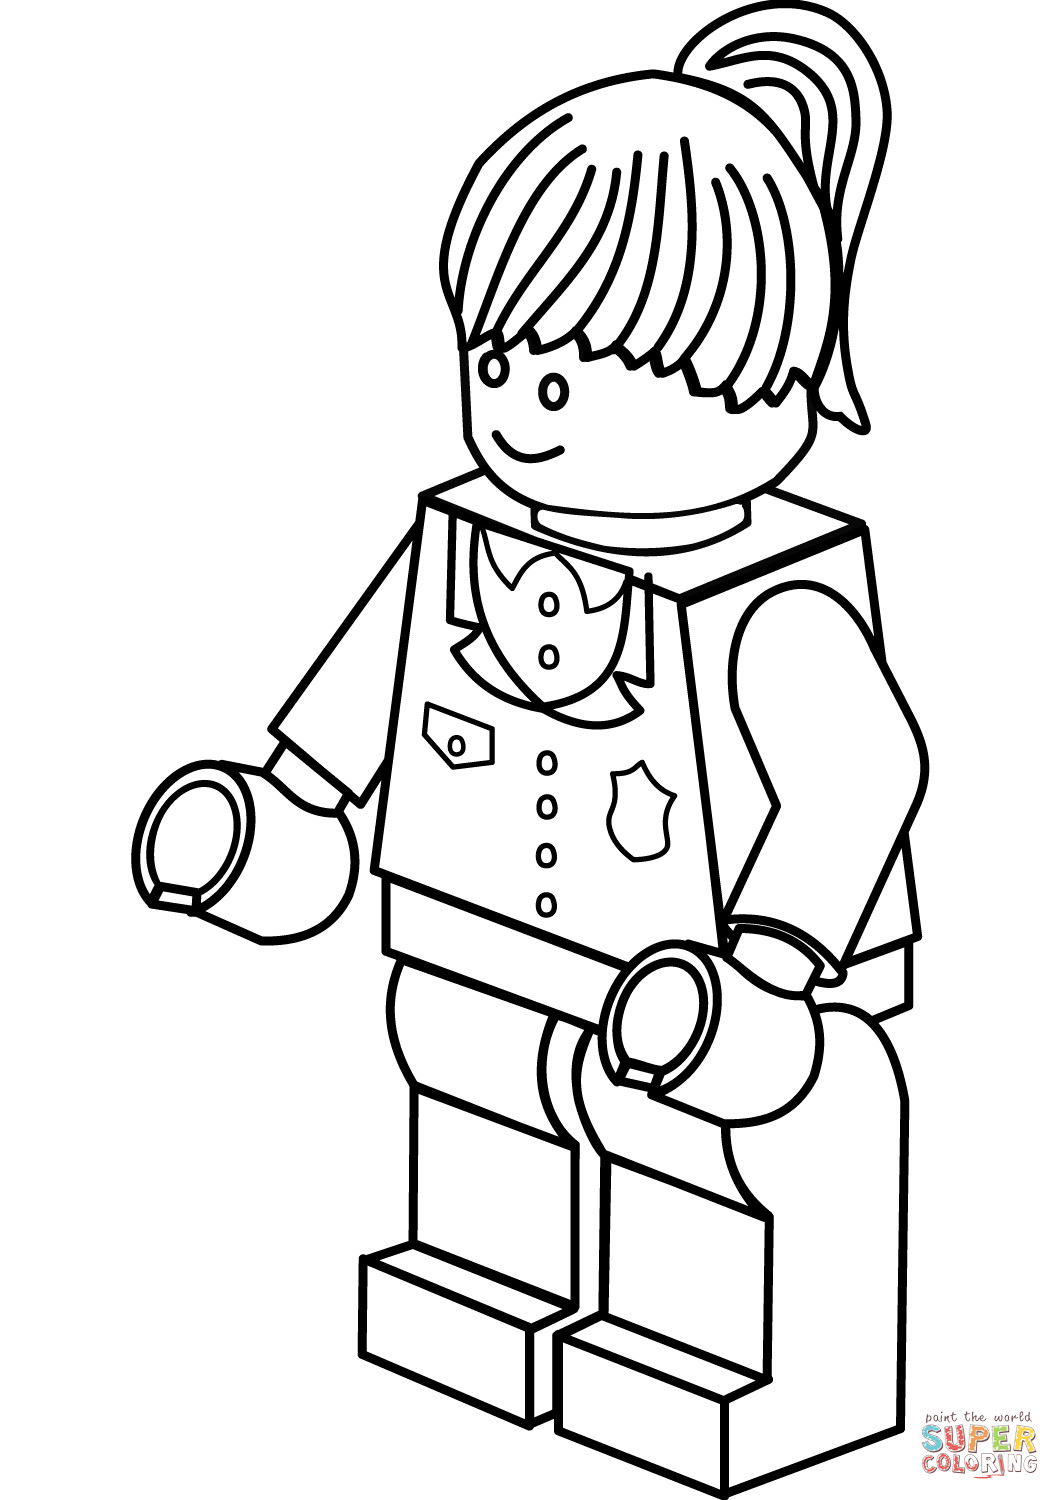 Lego Girls Coloring Pages
 Lego Police Woman coloring page